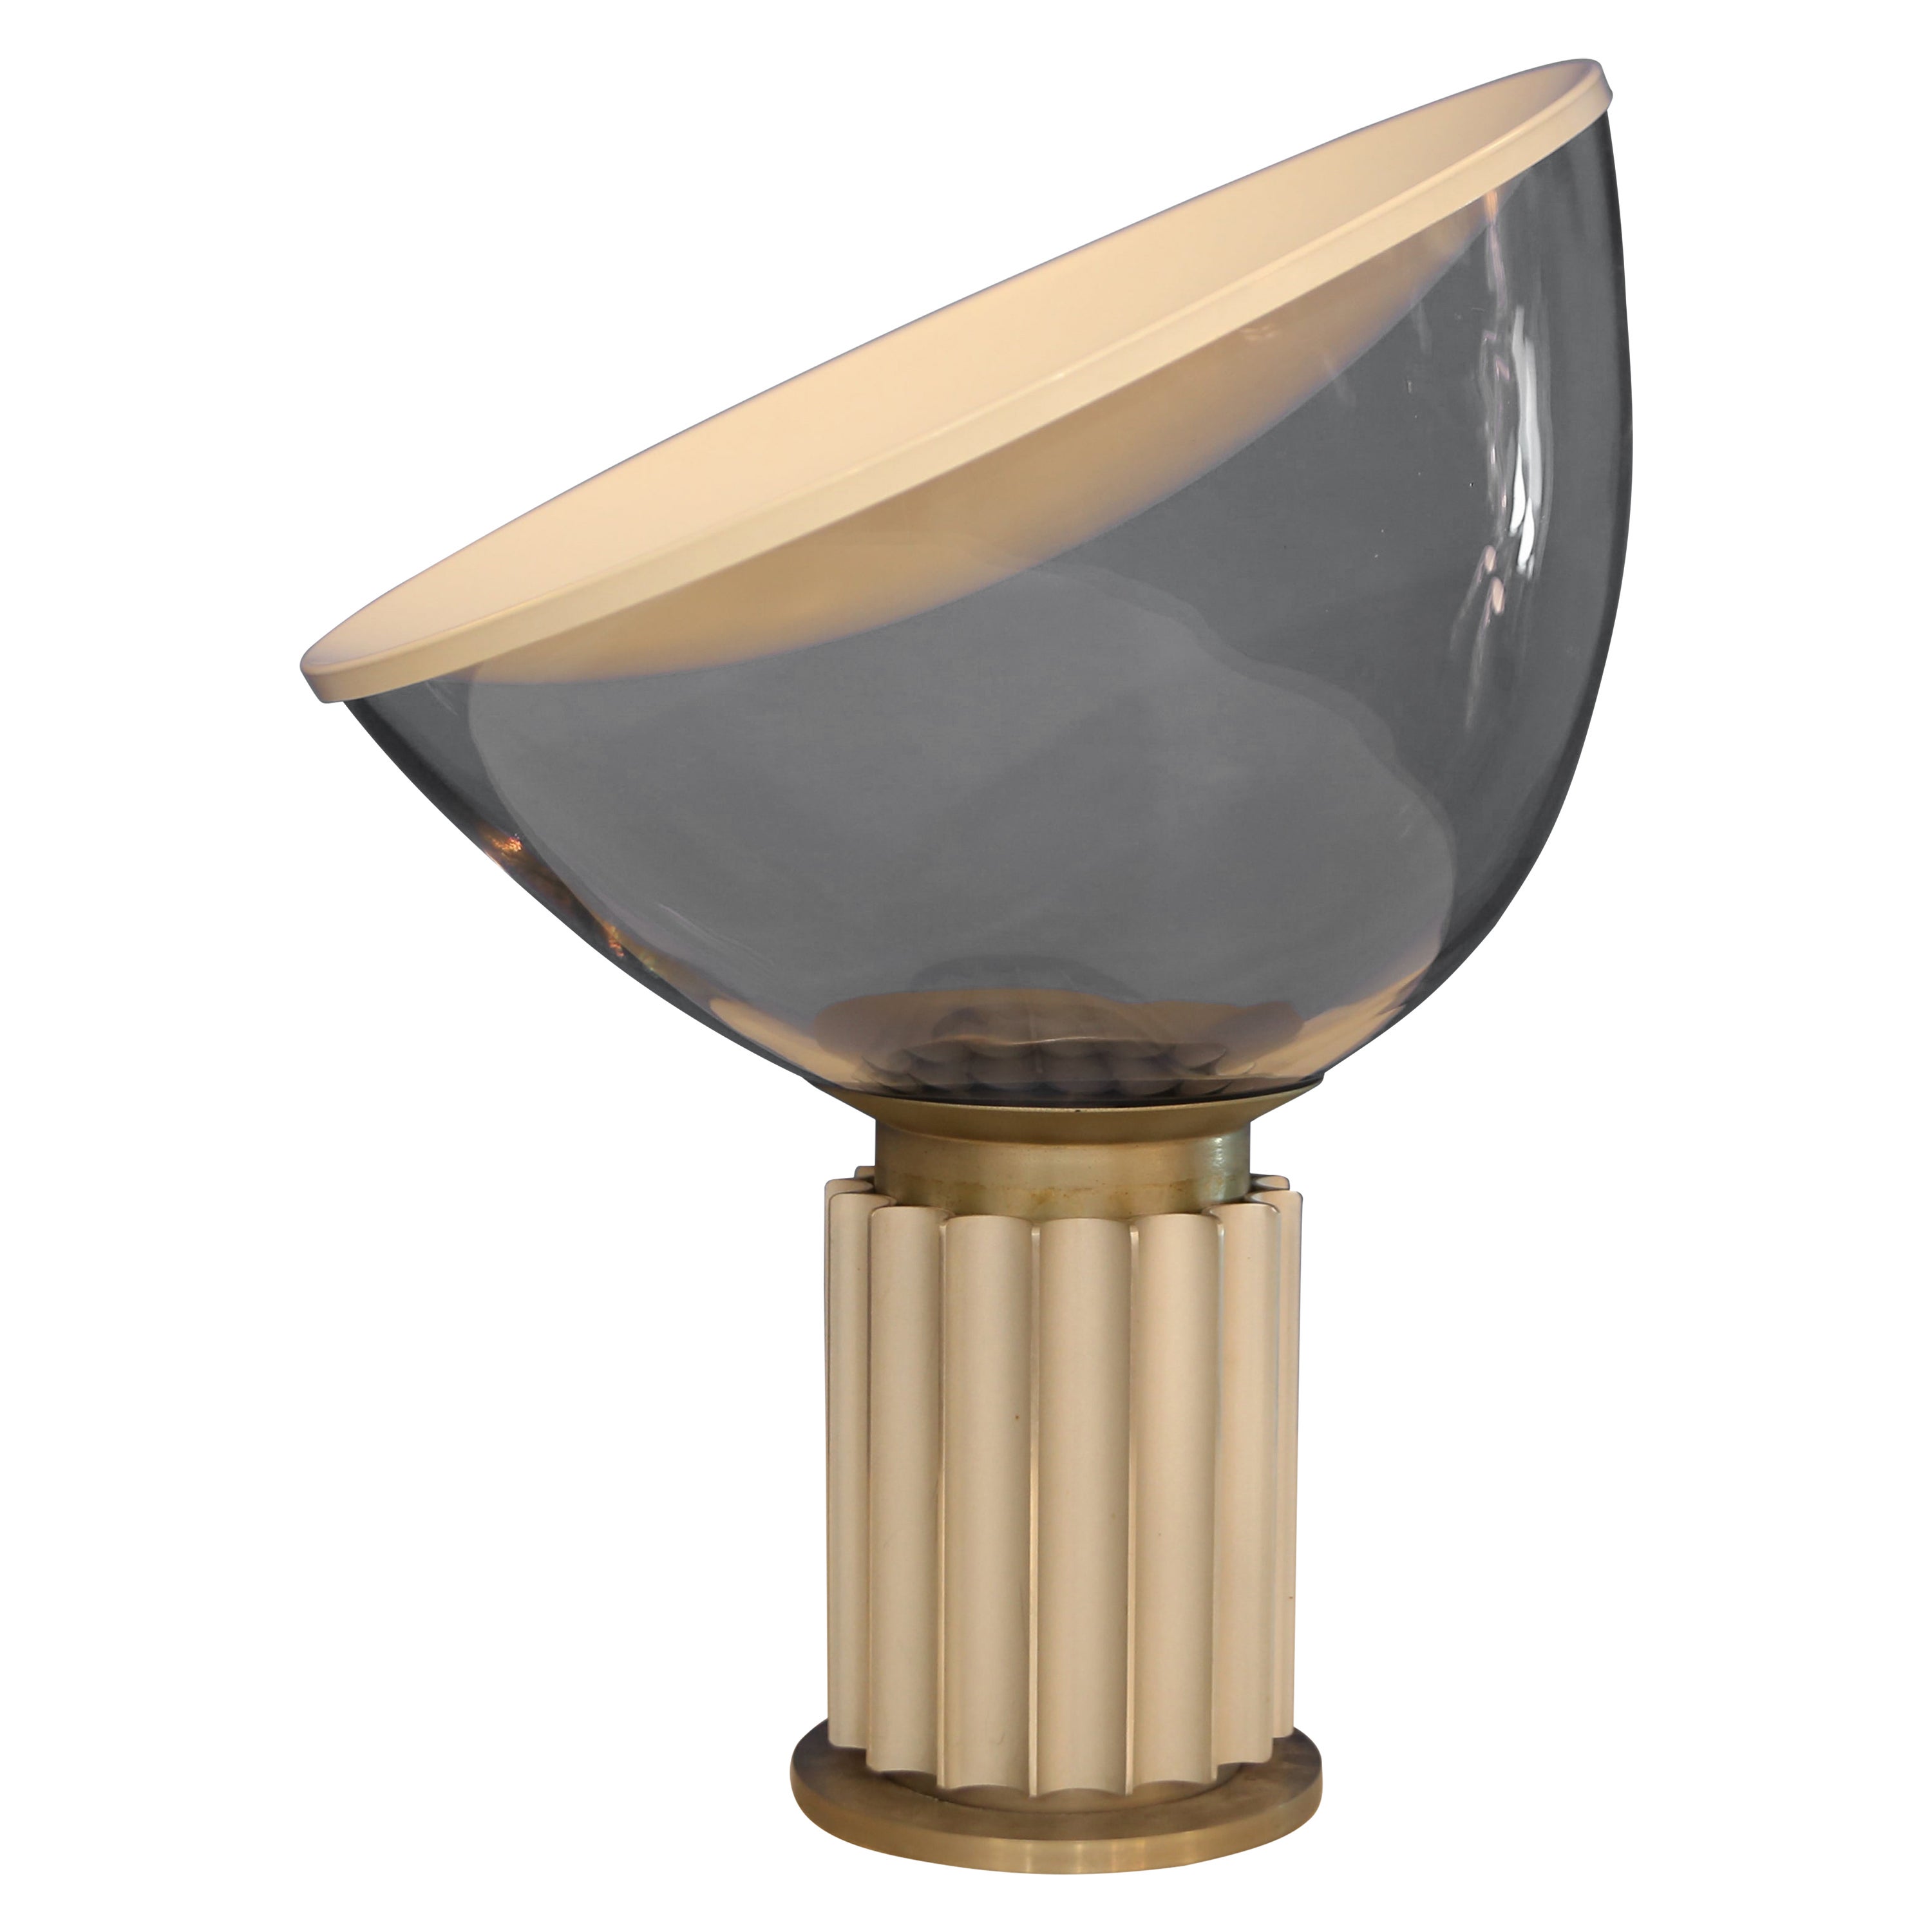 Achille and Pier Giacomo Castiglioni for Flos "Taccia" Table Lamp first edition  For Sale